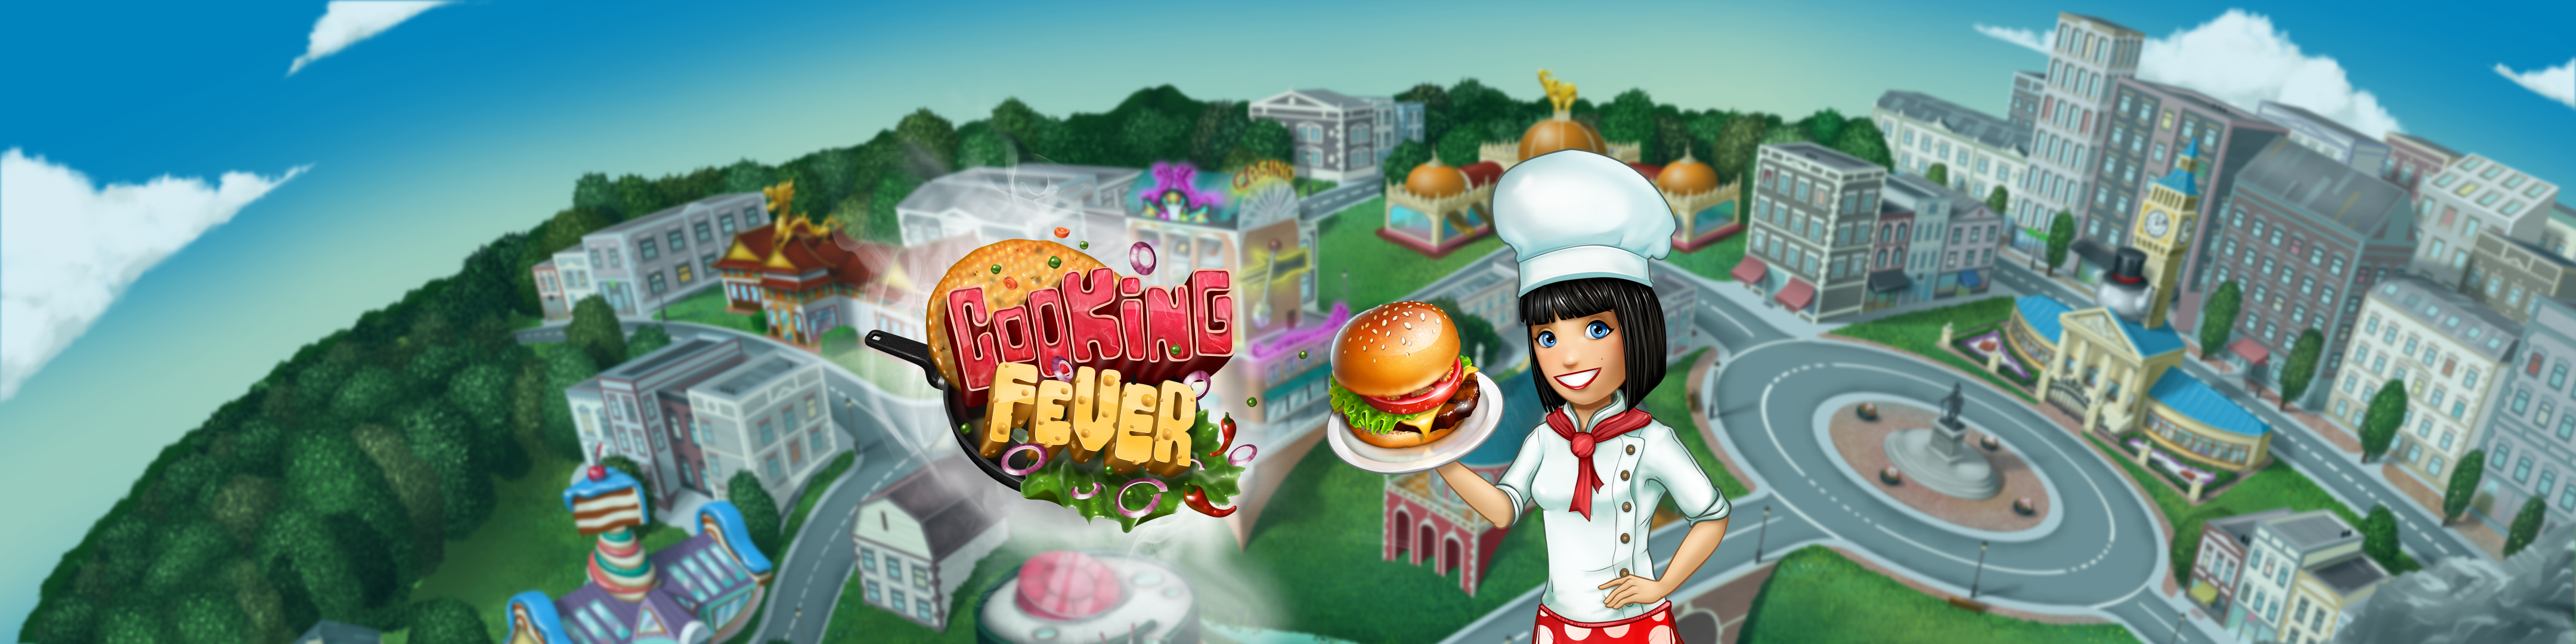 Cooking fever game latest version free download 2019